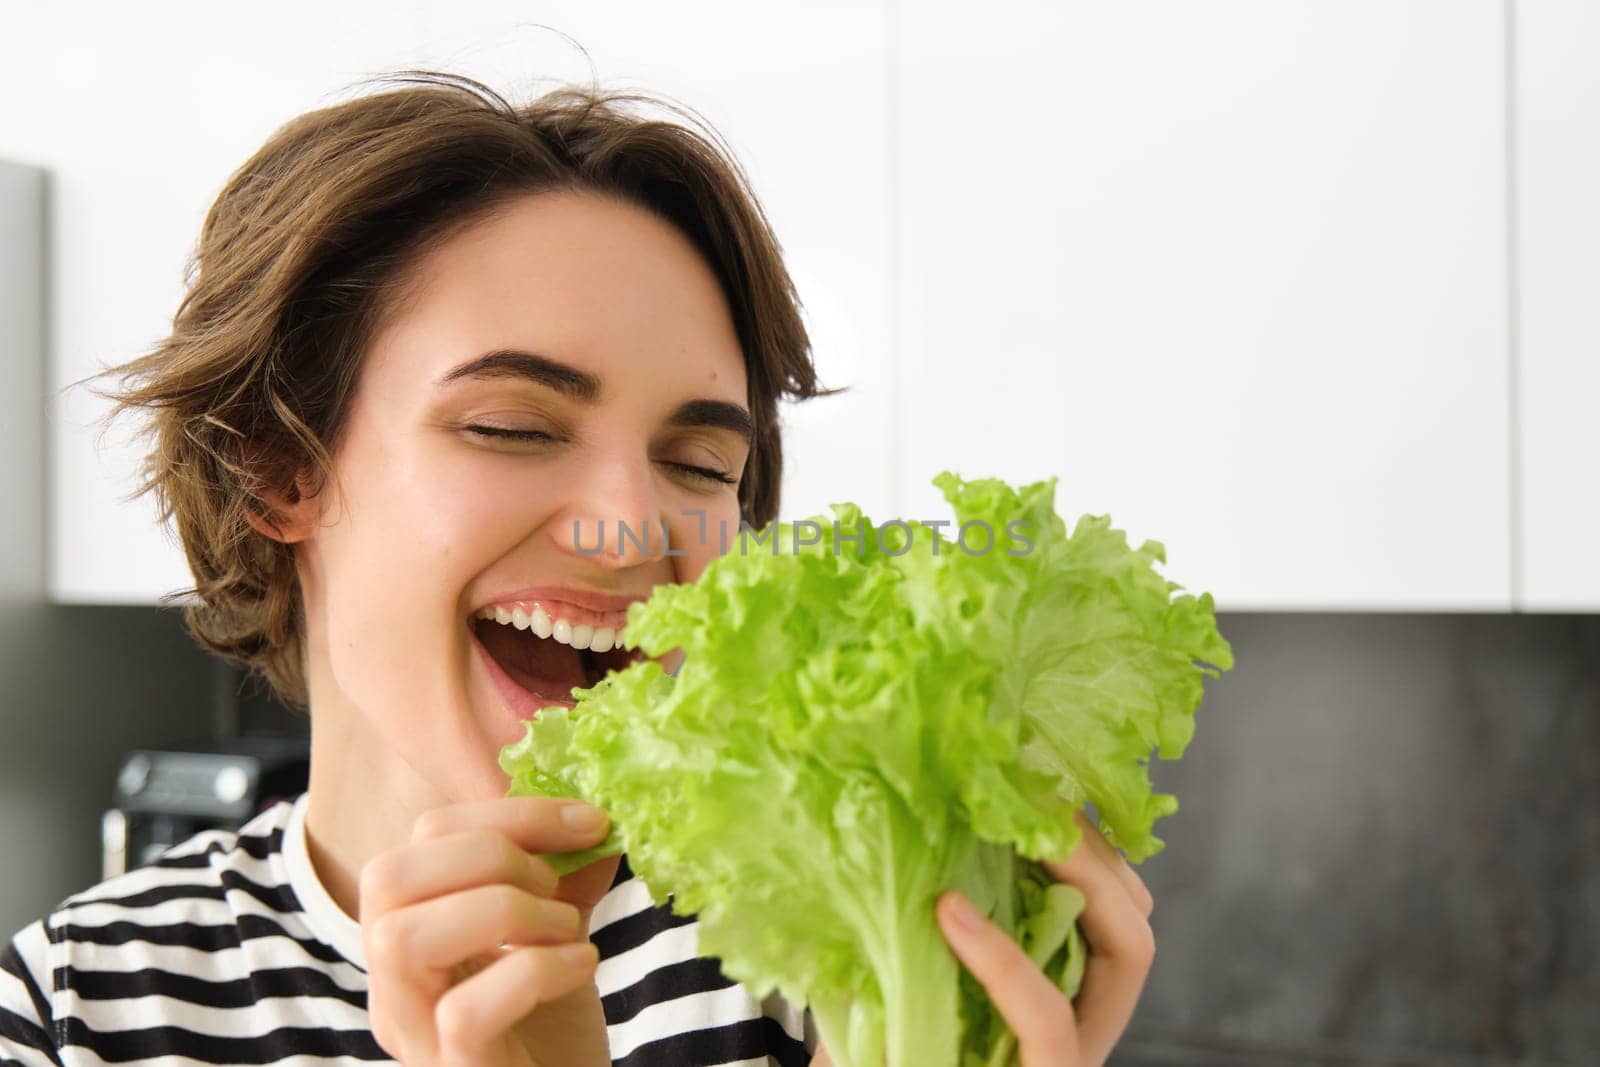 Close up portrait of happy, smiling young woman biting salad leaf, loves vegetables, making herself a salad, standing in the kitchen, cooking vegetarian meal.